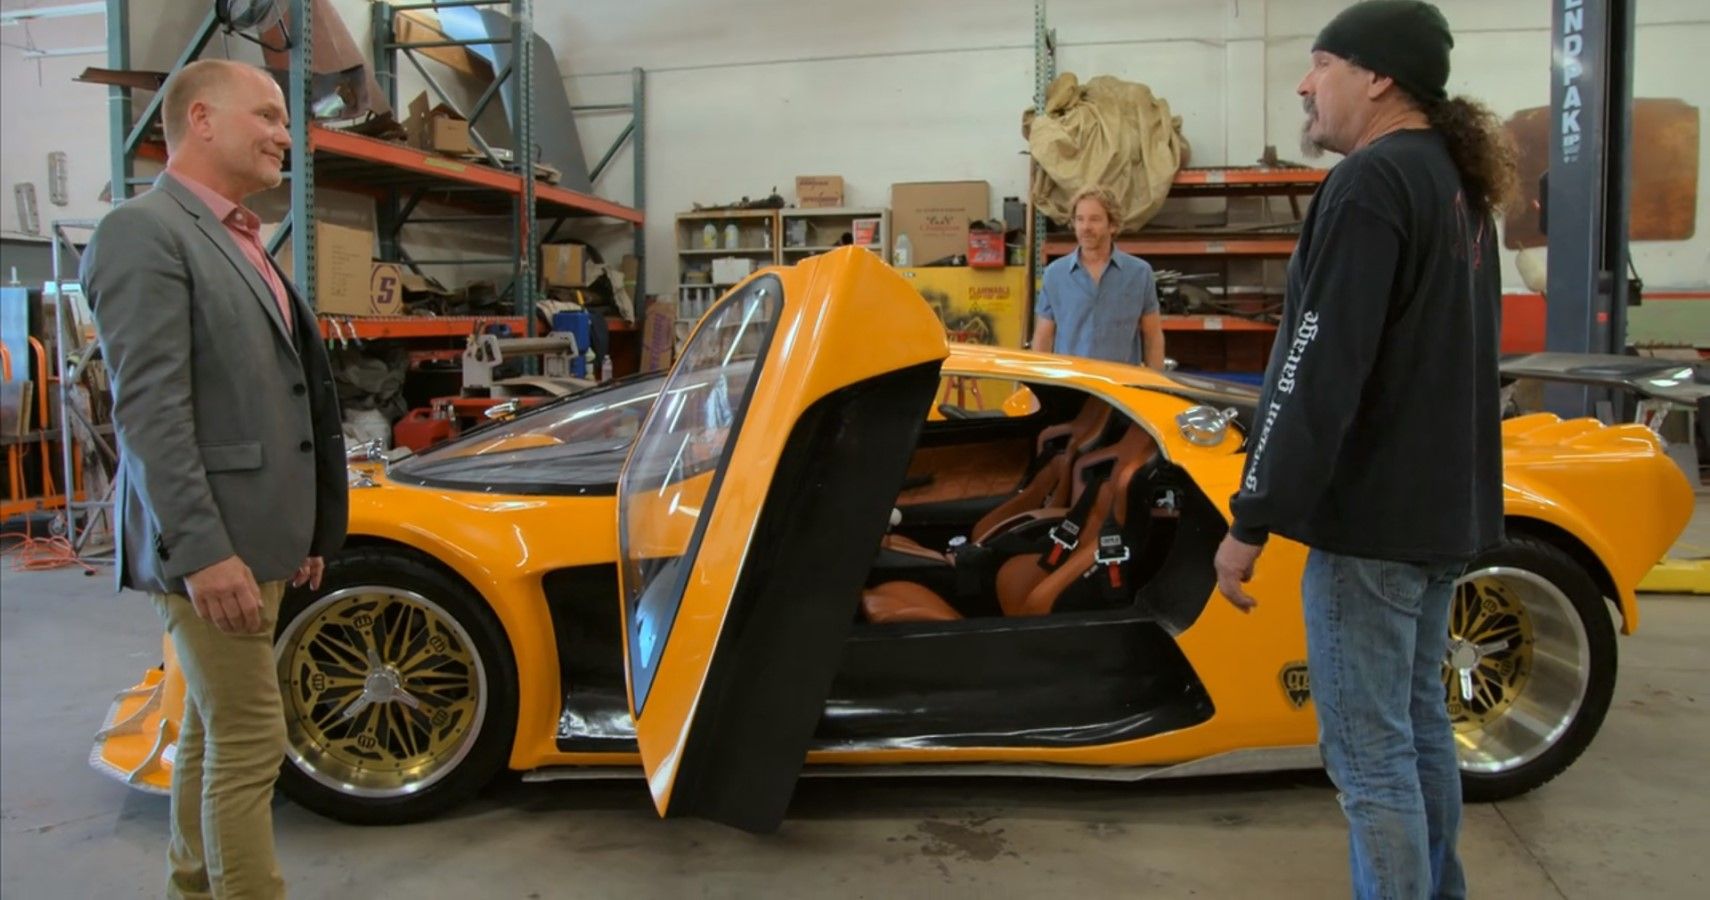 Gotham Garage finally sold their concept car and motorcycle duo